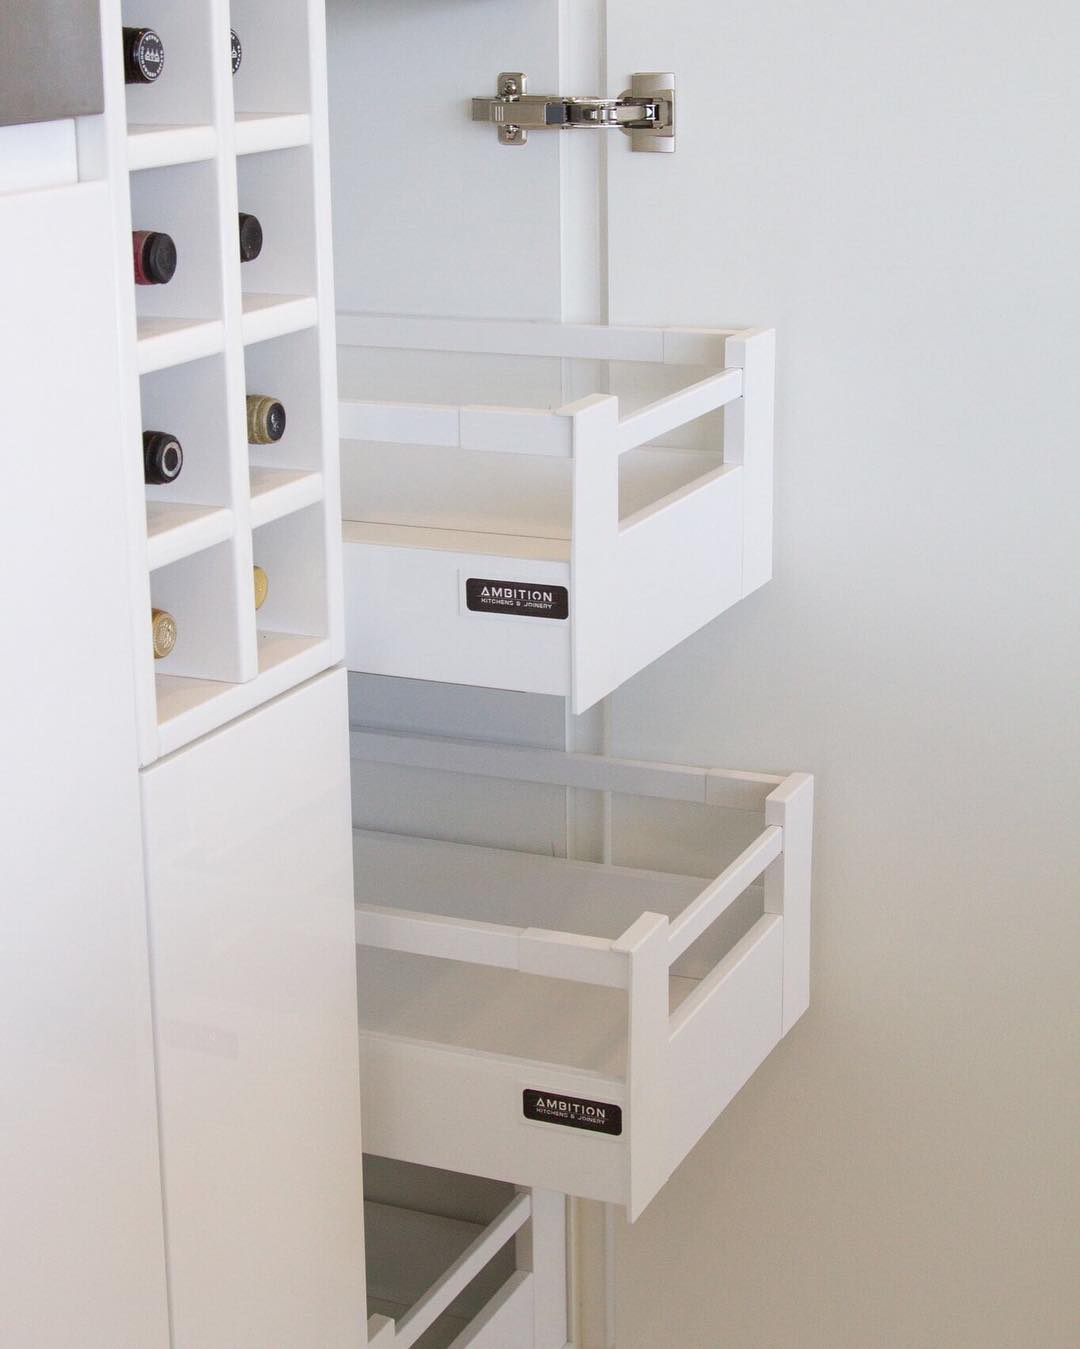 Blum Antaro inner drawers are a stylish pull out design, that gives you easy access to your pantry.